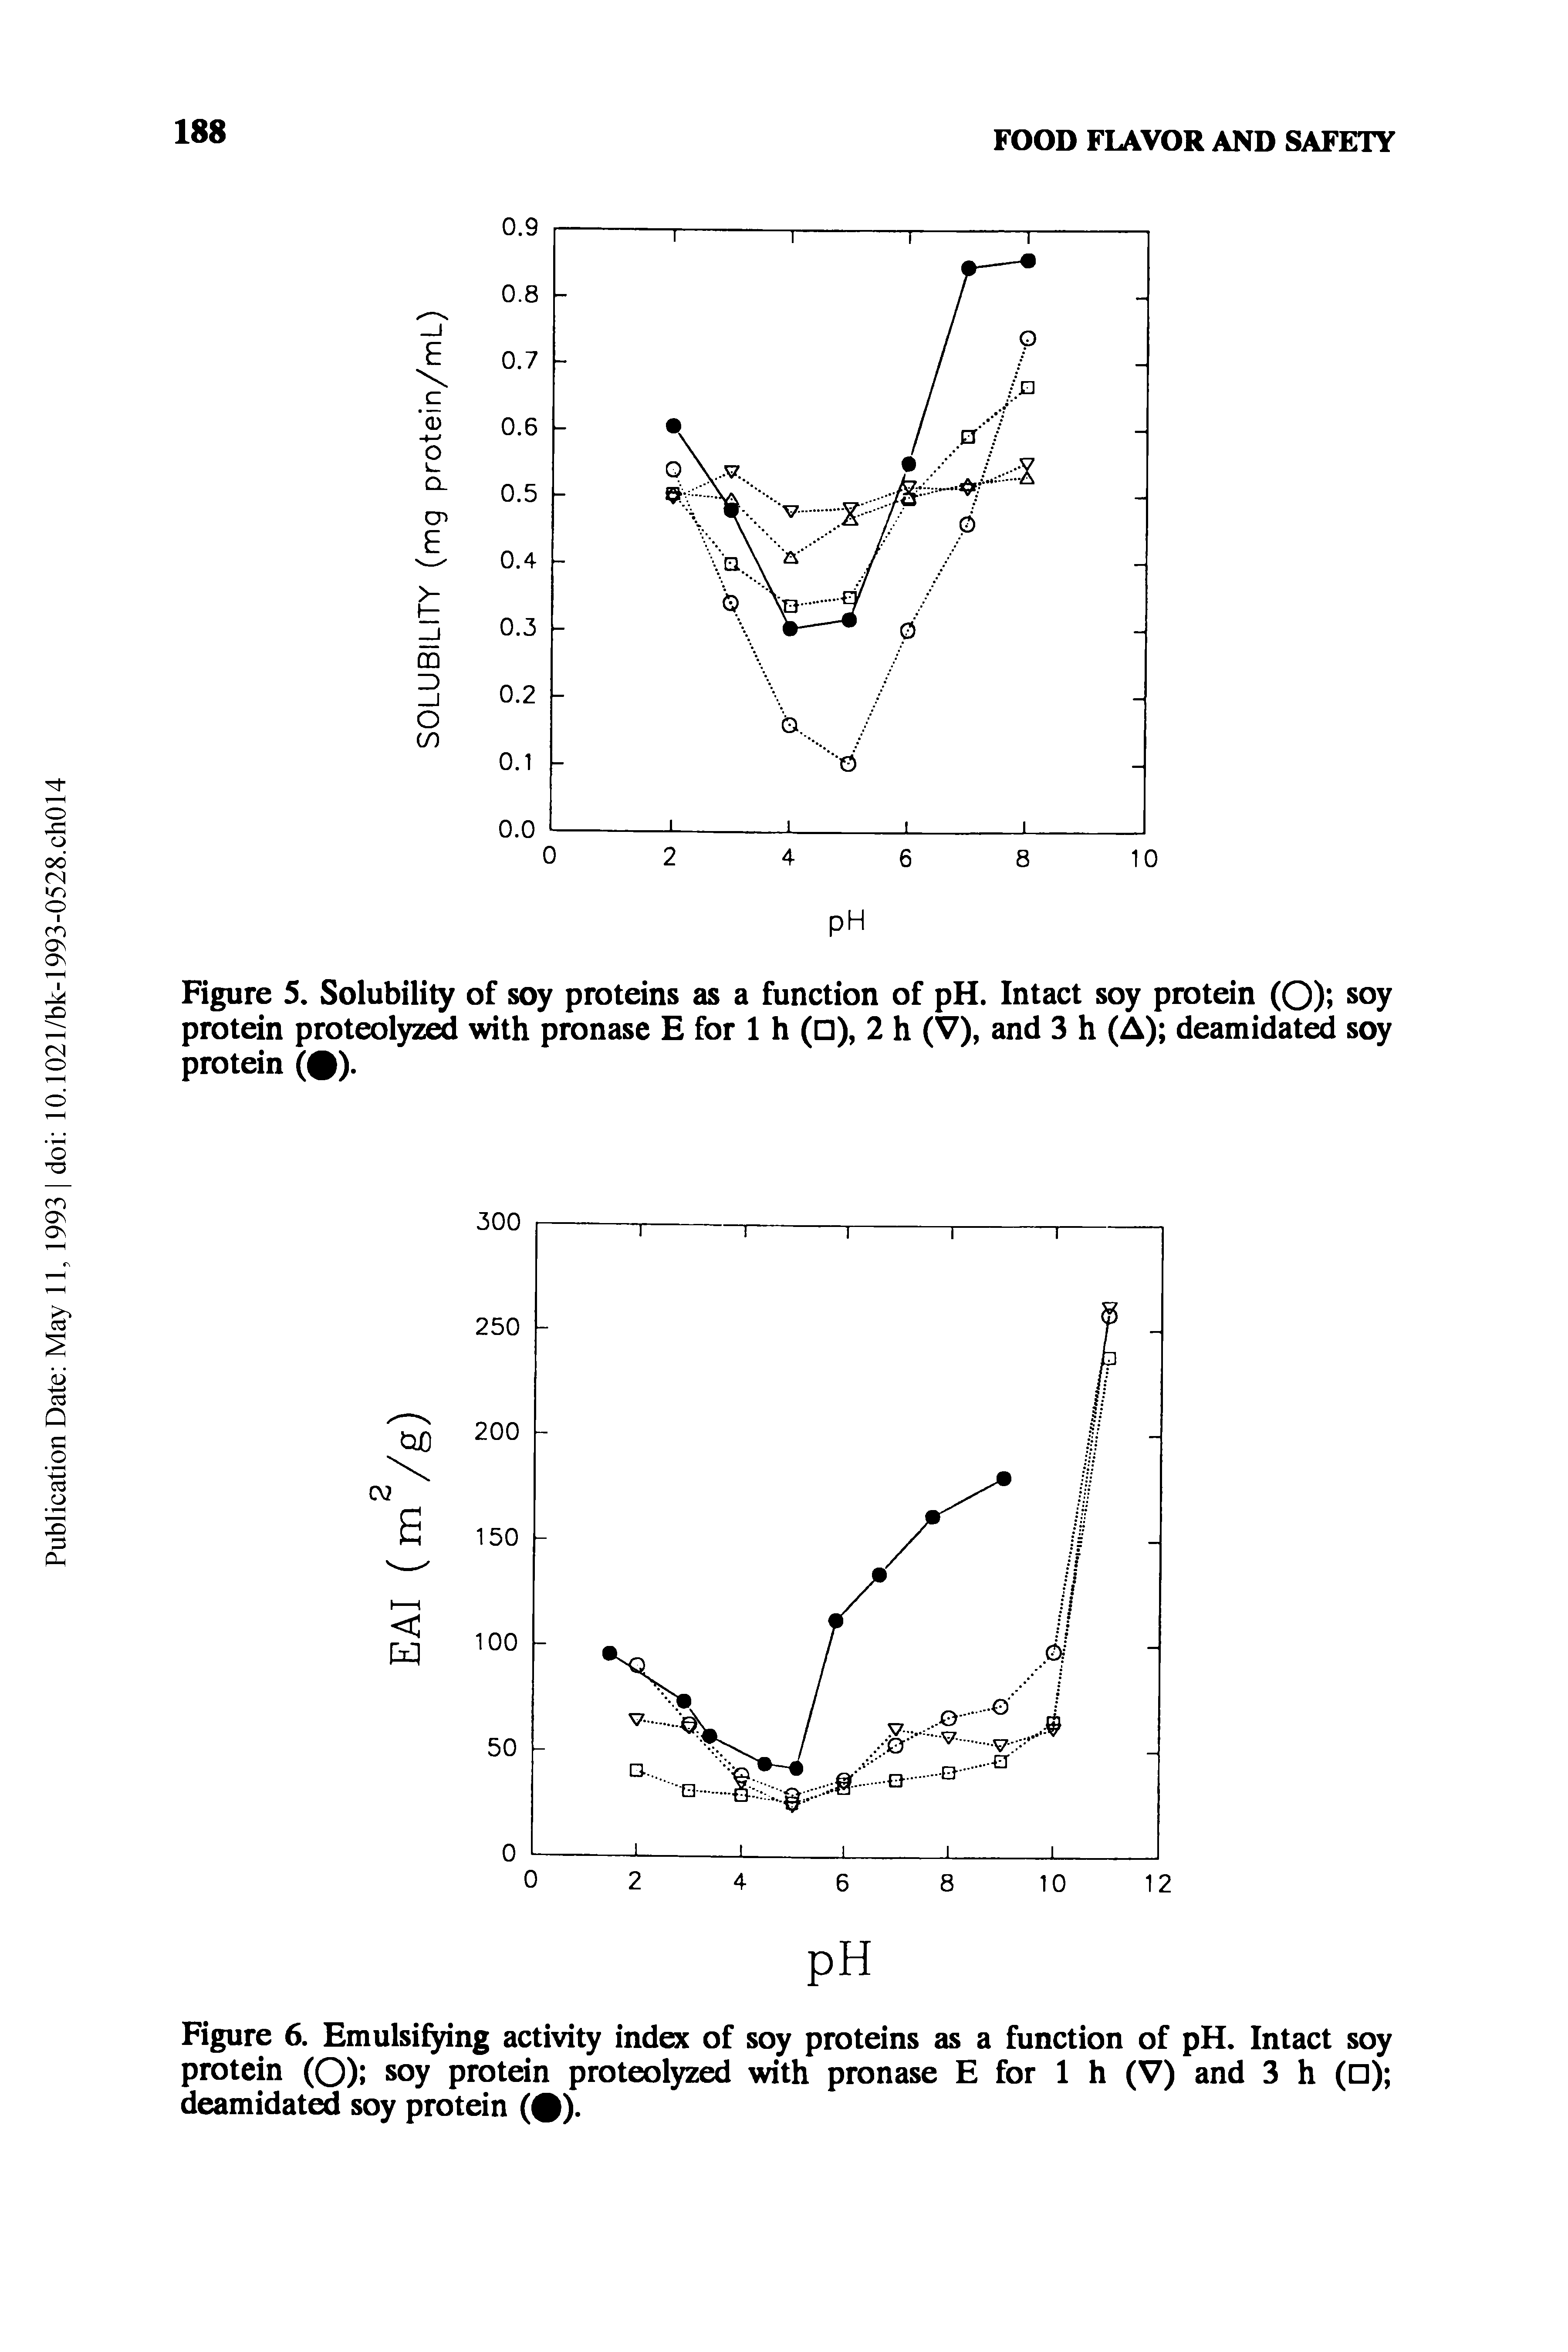 Figure 6. Emulsifying activity index of soy proteins as a function of pH. Intact soy protein (O) soy protein proteolyzed with pronase E for 1 h (V) and 3 h ( ) deamidated soy protein ( ).